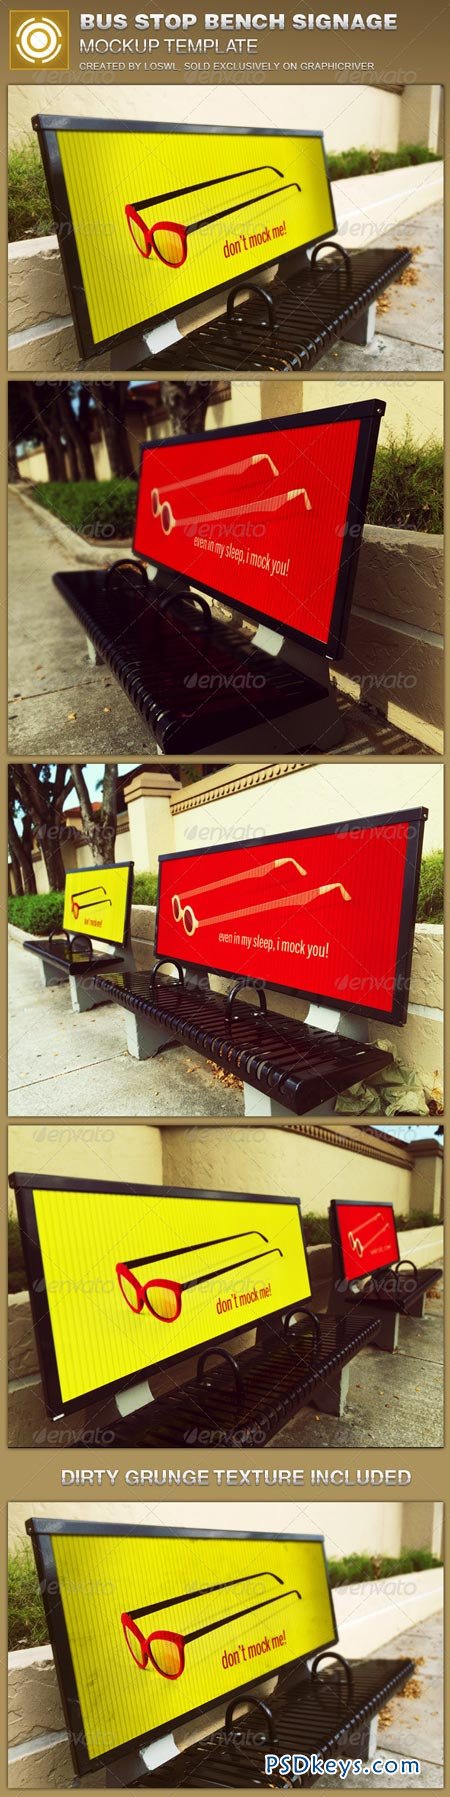 Corrugated Bus Stop Bench Signage Mockup Template 8688819